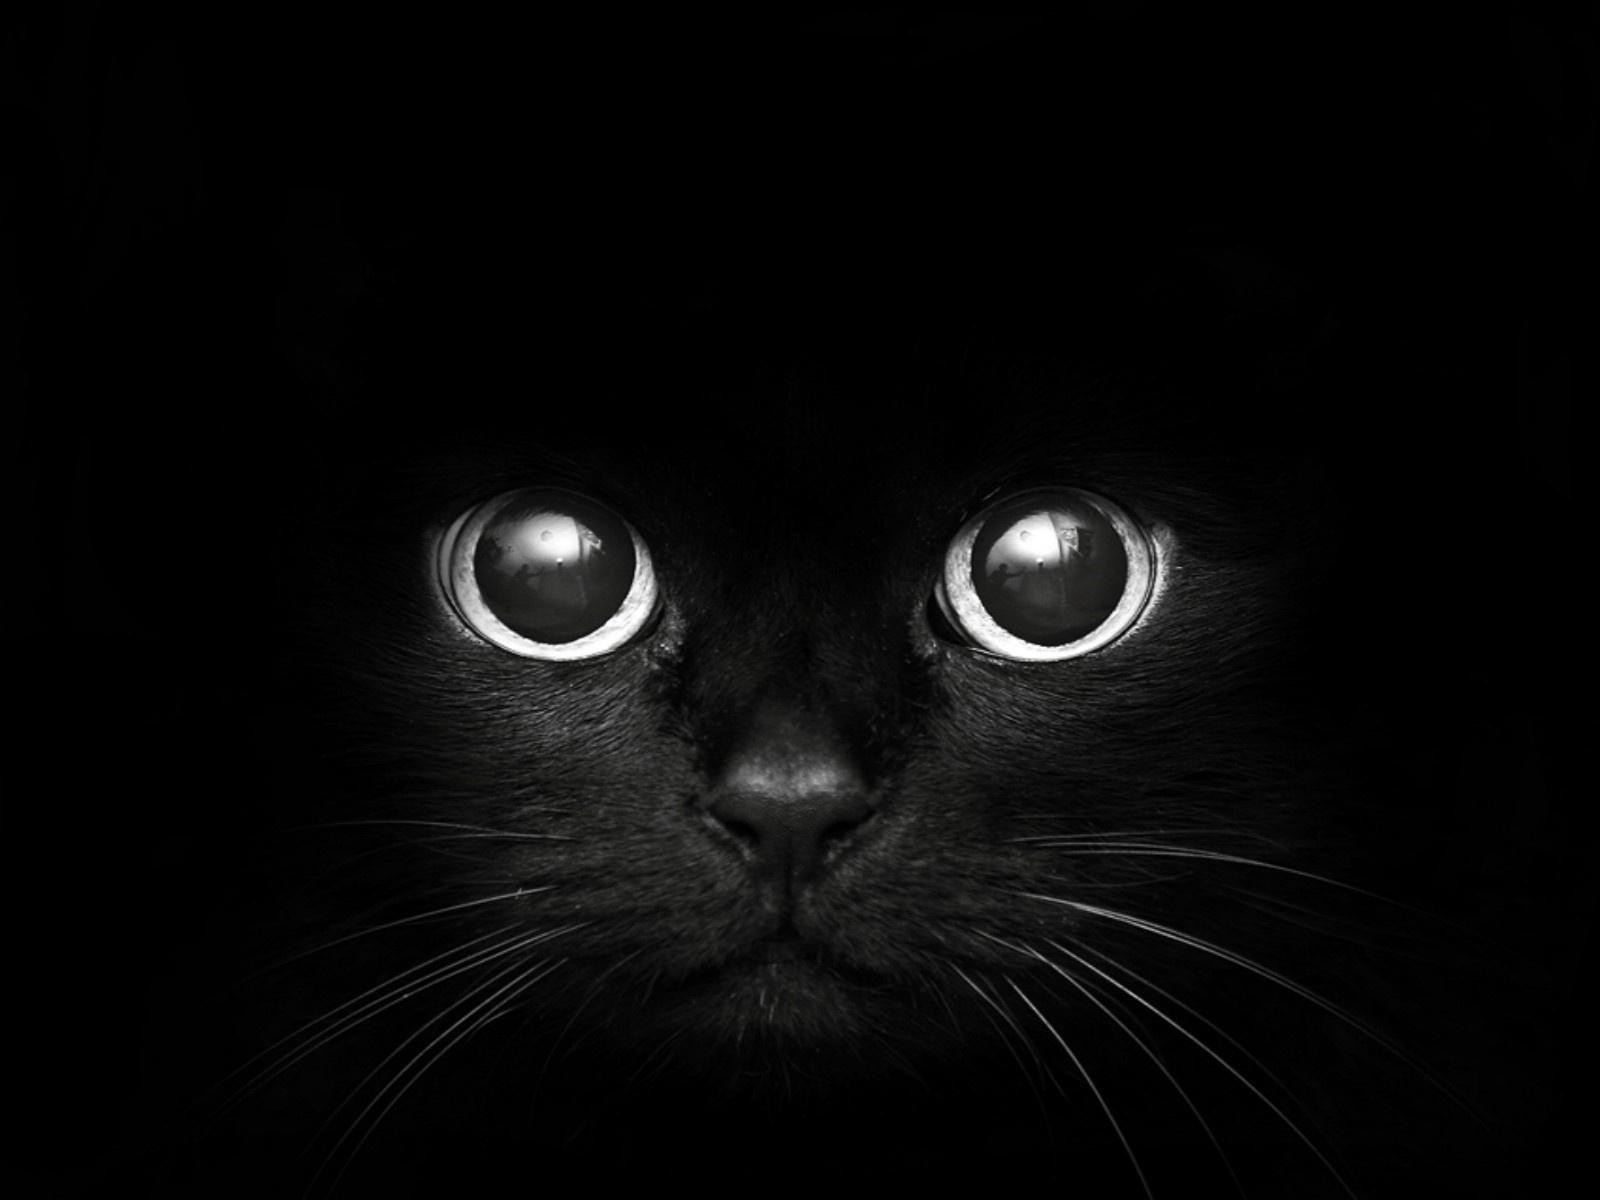 Black Cat Wallpaper   HD Wallpapers Backgrounds of Your Choice